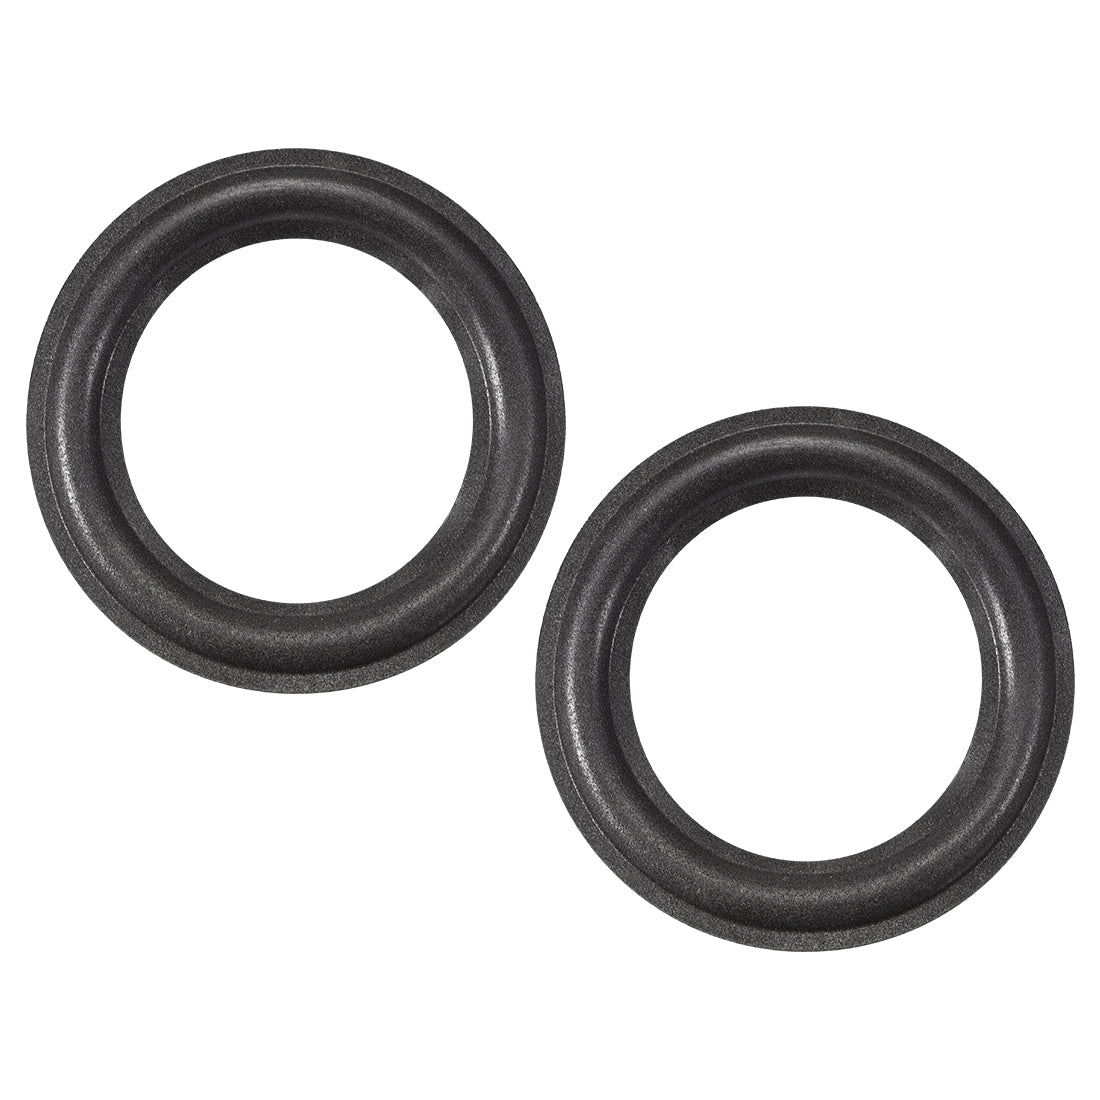 uxcell Uxcell 3.5" 3.5 inches Speaker Foam Edge Surround Rings Replacement Parts for Speaker Repair or DIY 2pcs